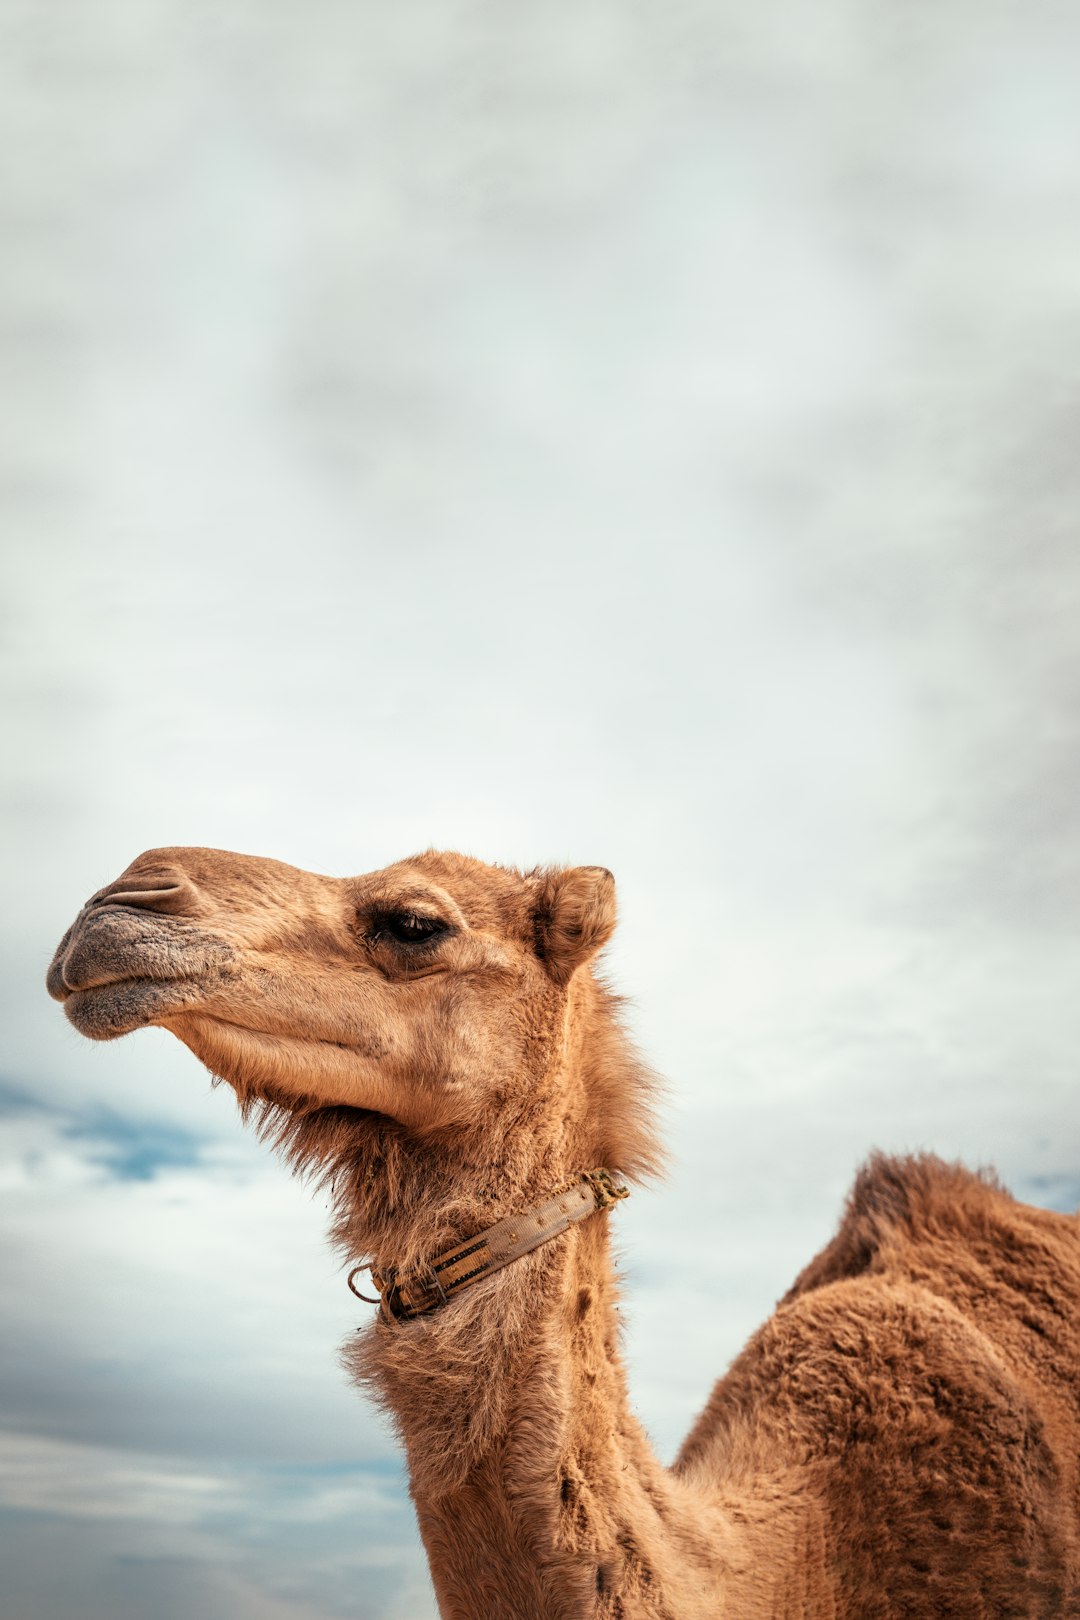  brown camel under white clouds during daytime camel